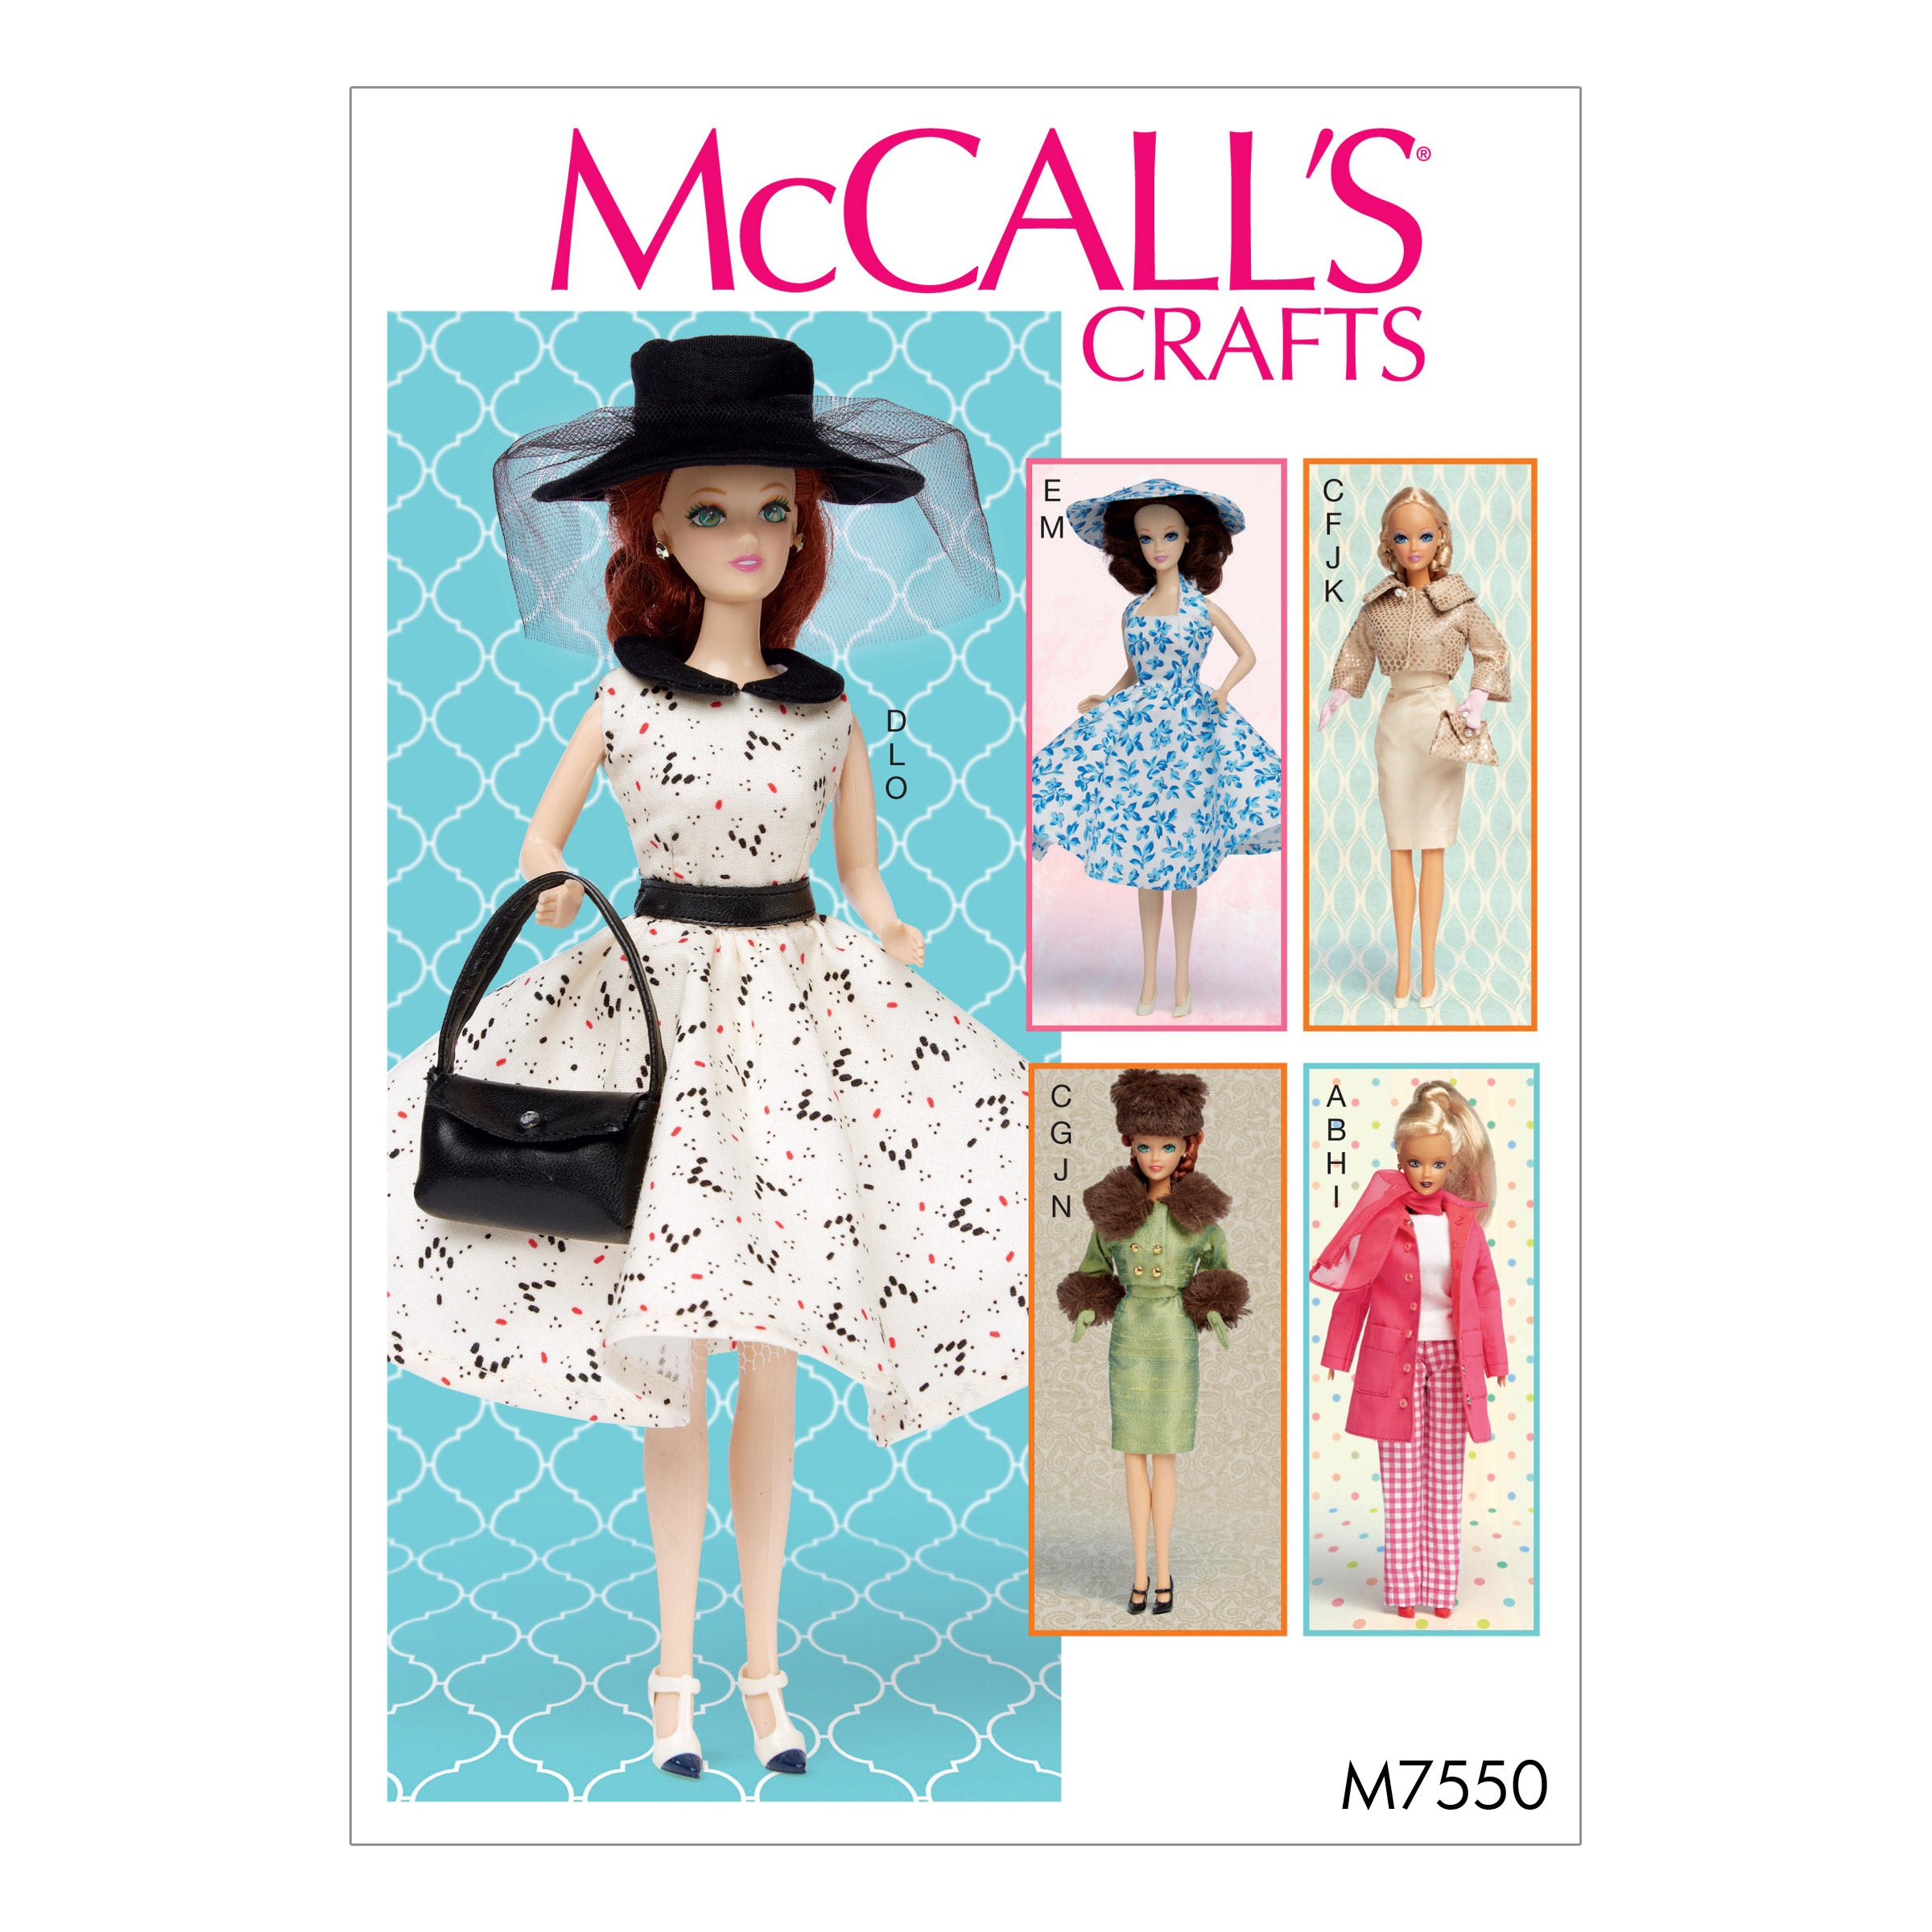 McCall's Sewing Pattern 7550 Retro-Style Clothes and Accessories for Dolls from Jaycotts Sewing Supplies